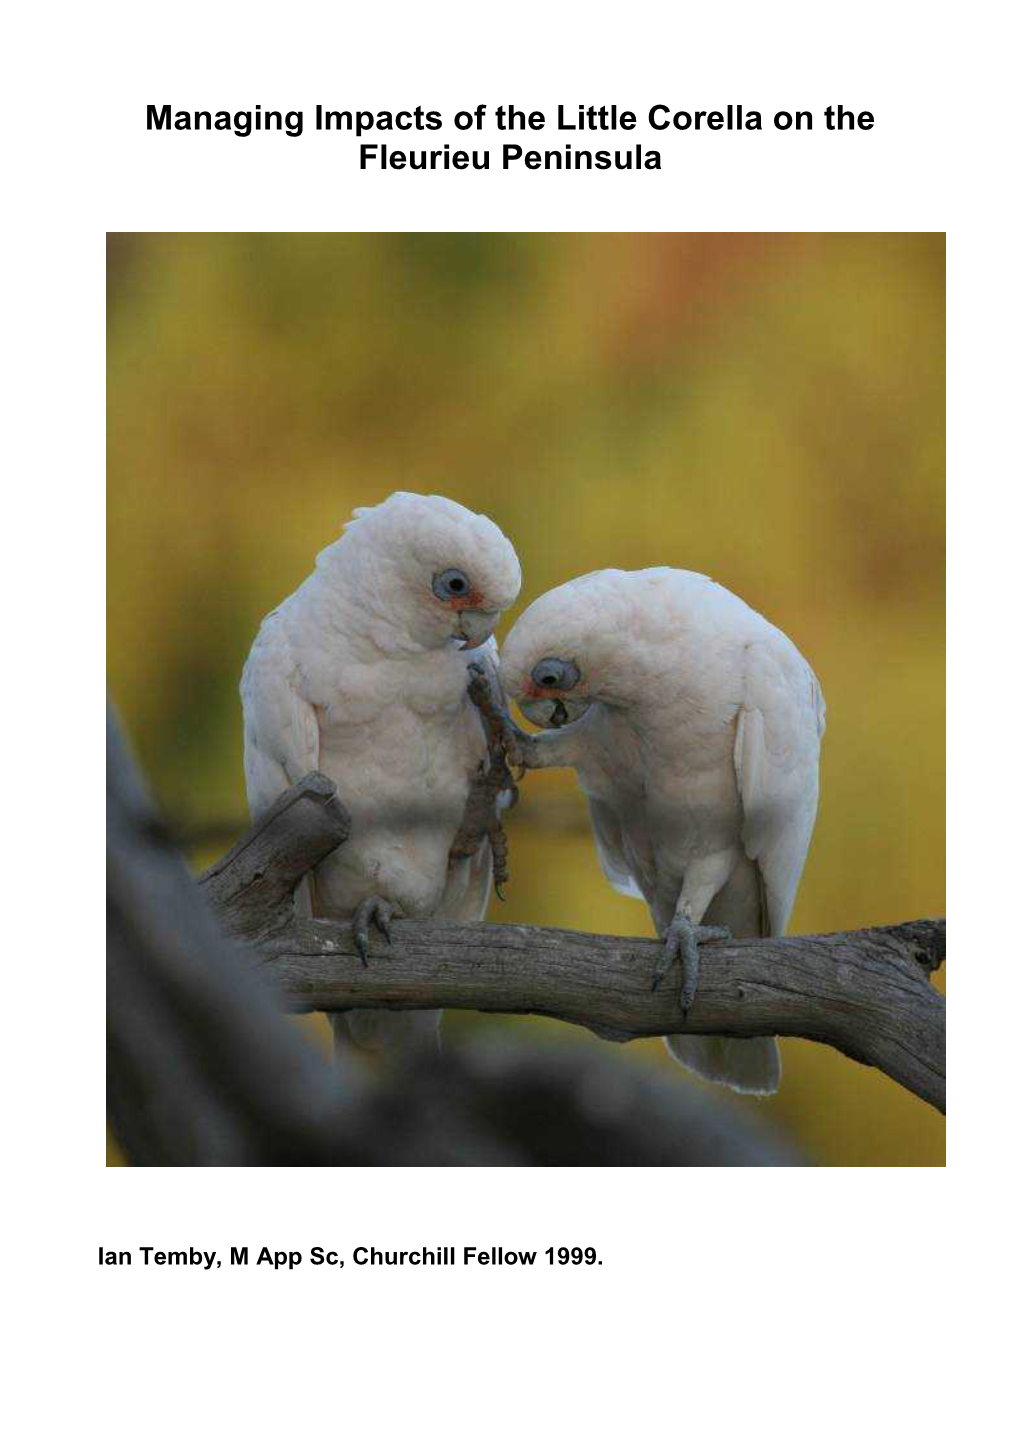 Managing Impacts of Corellas Ian Temby Report